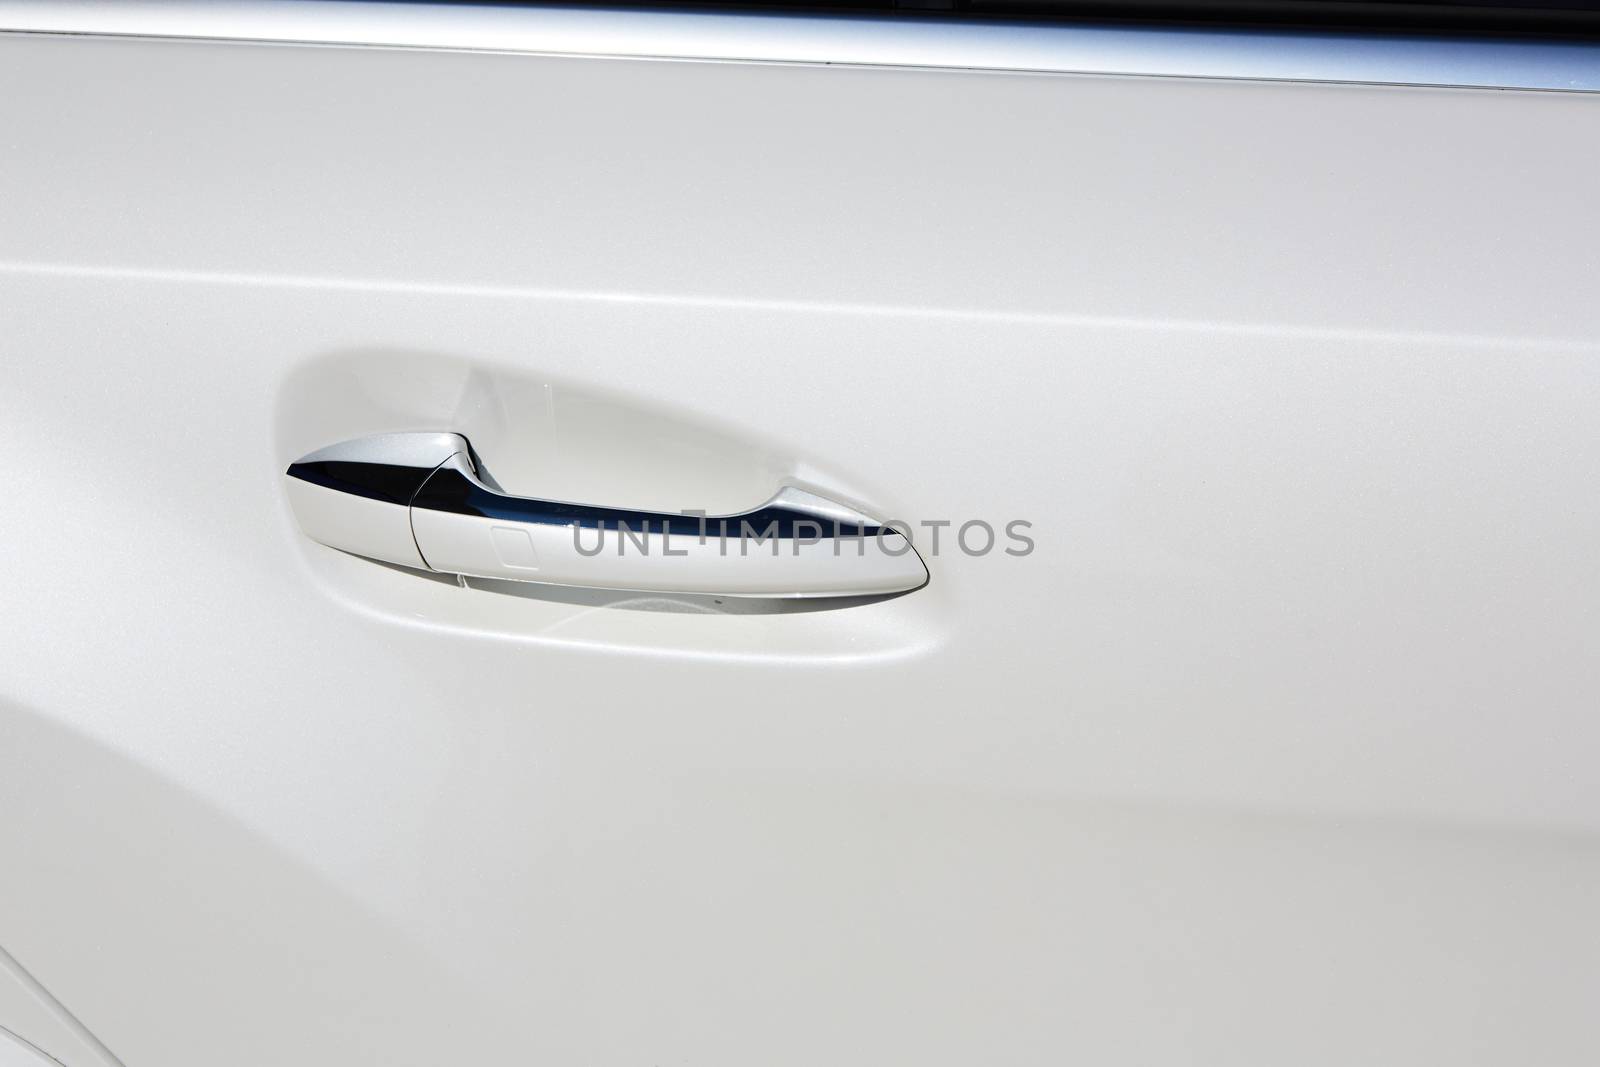 The white car door handle. Close up